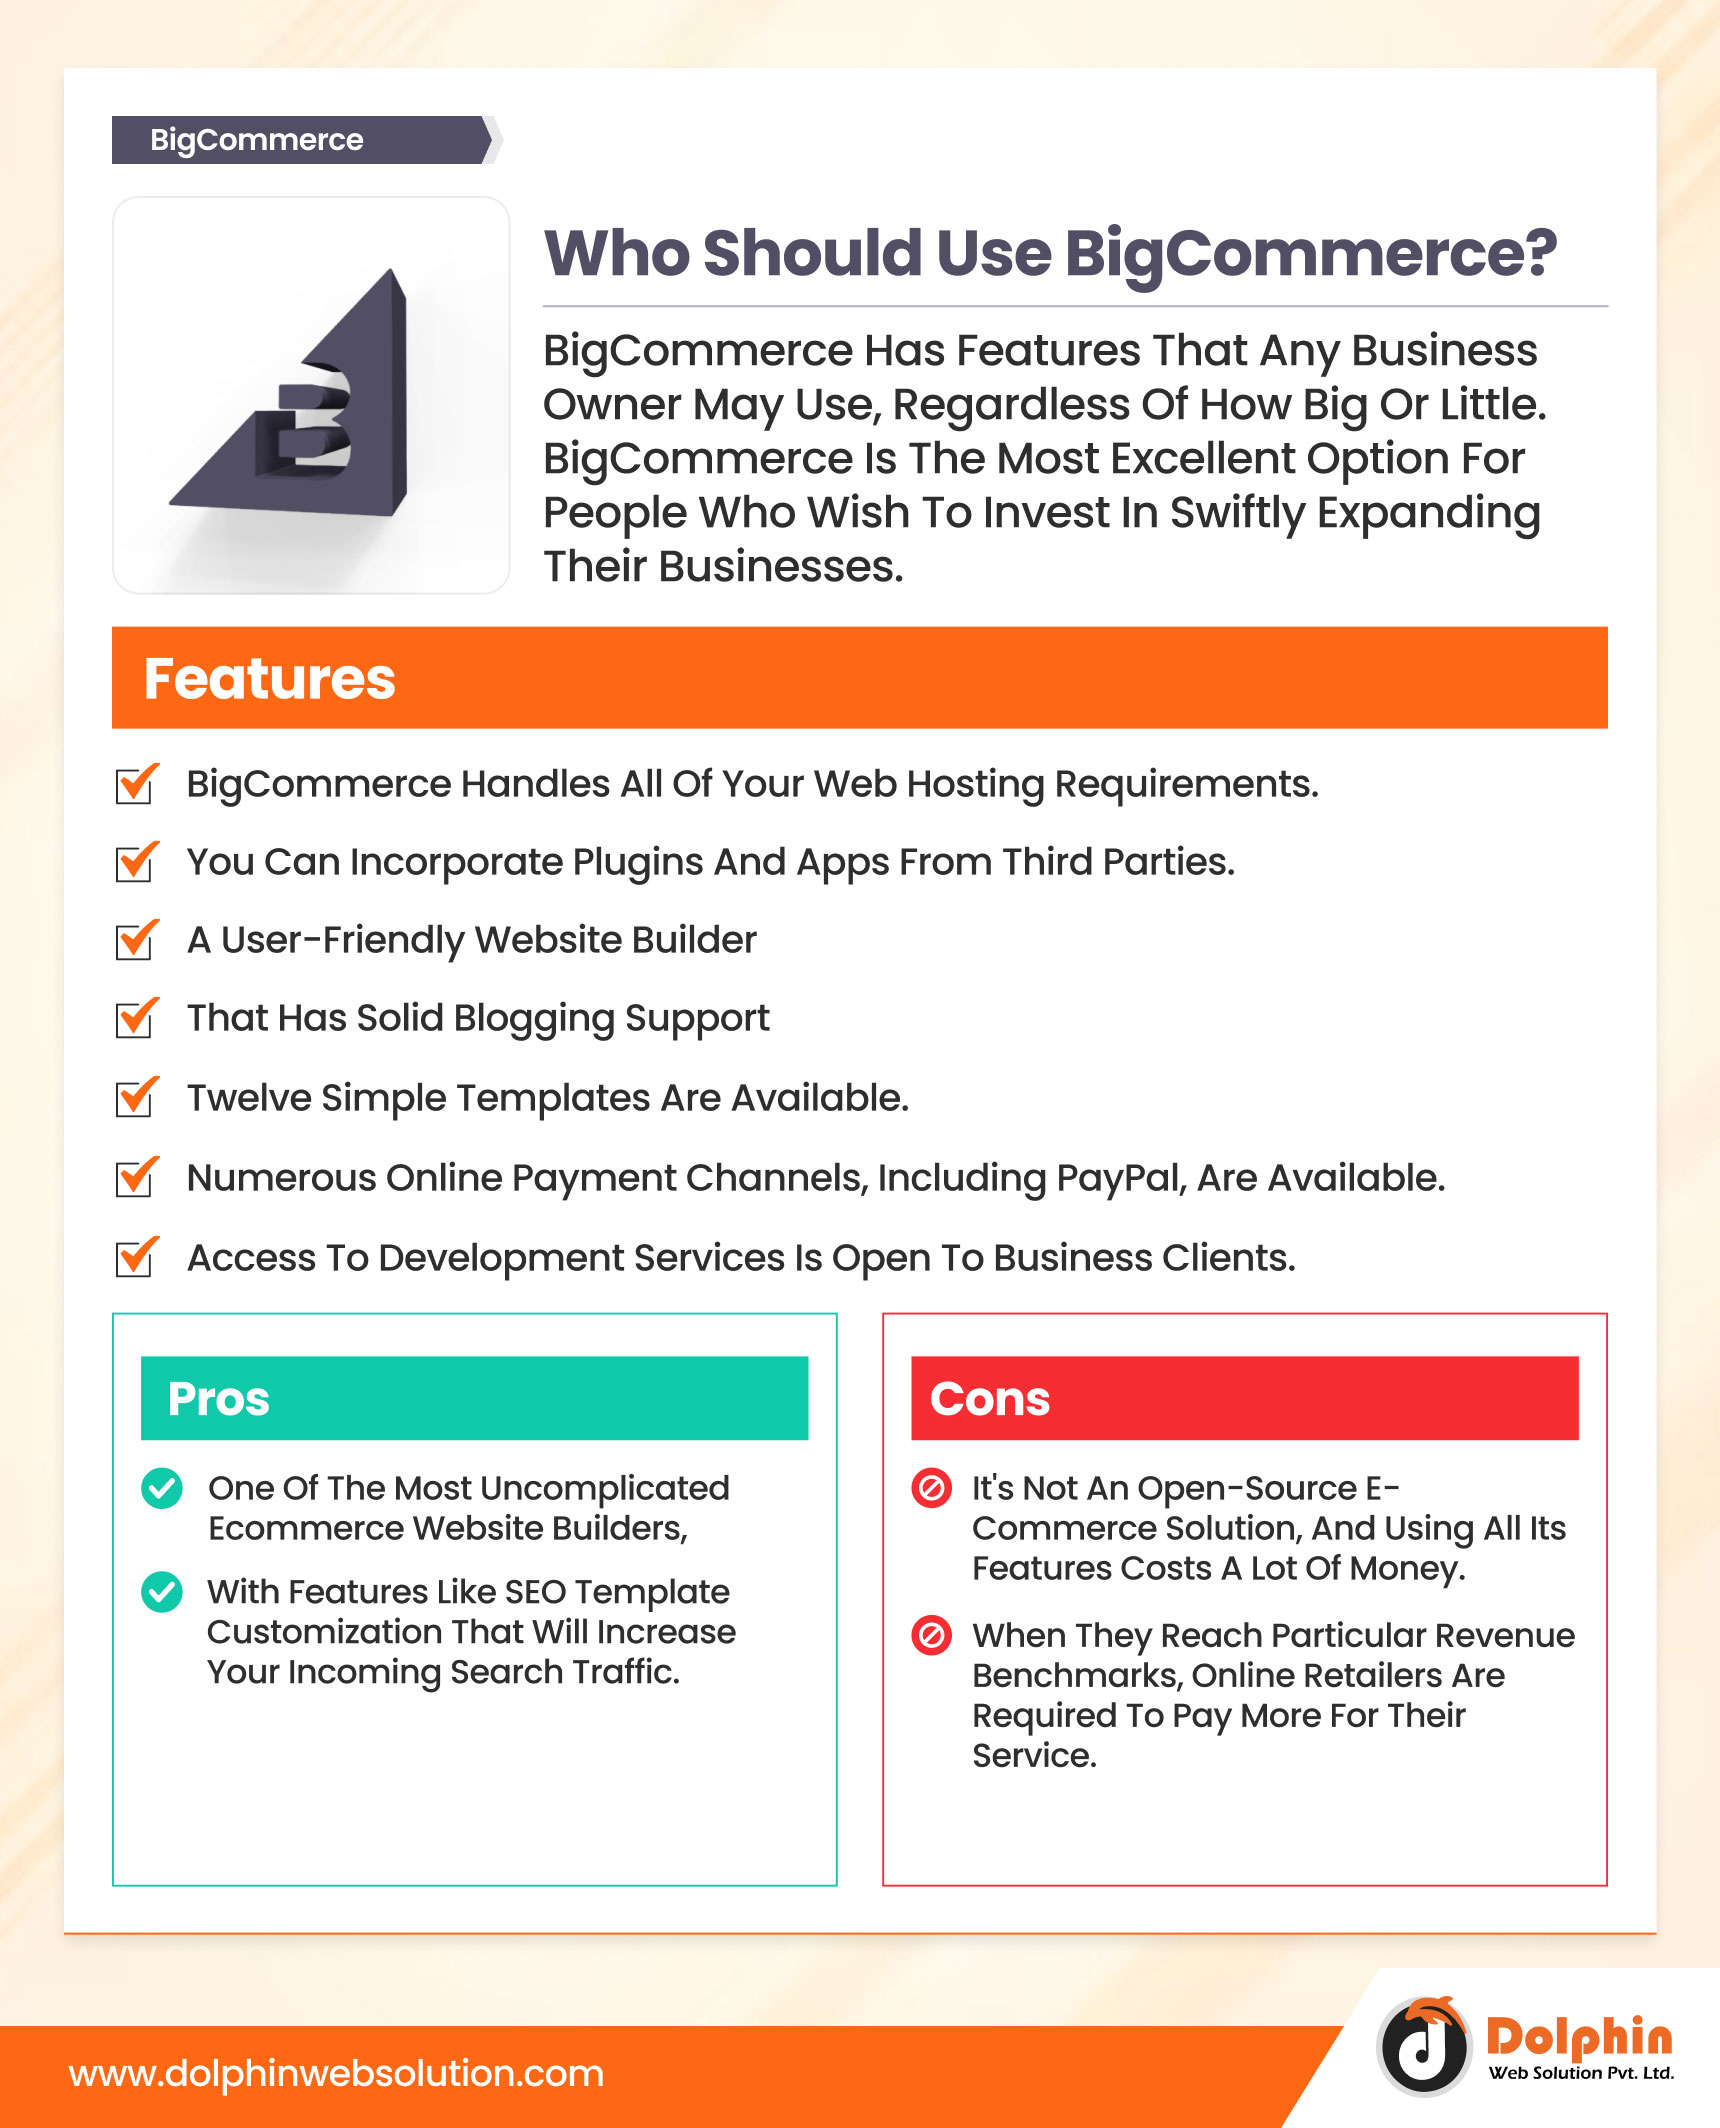 BigCommerce Pros and Cons